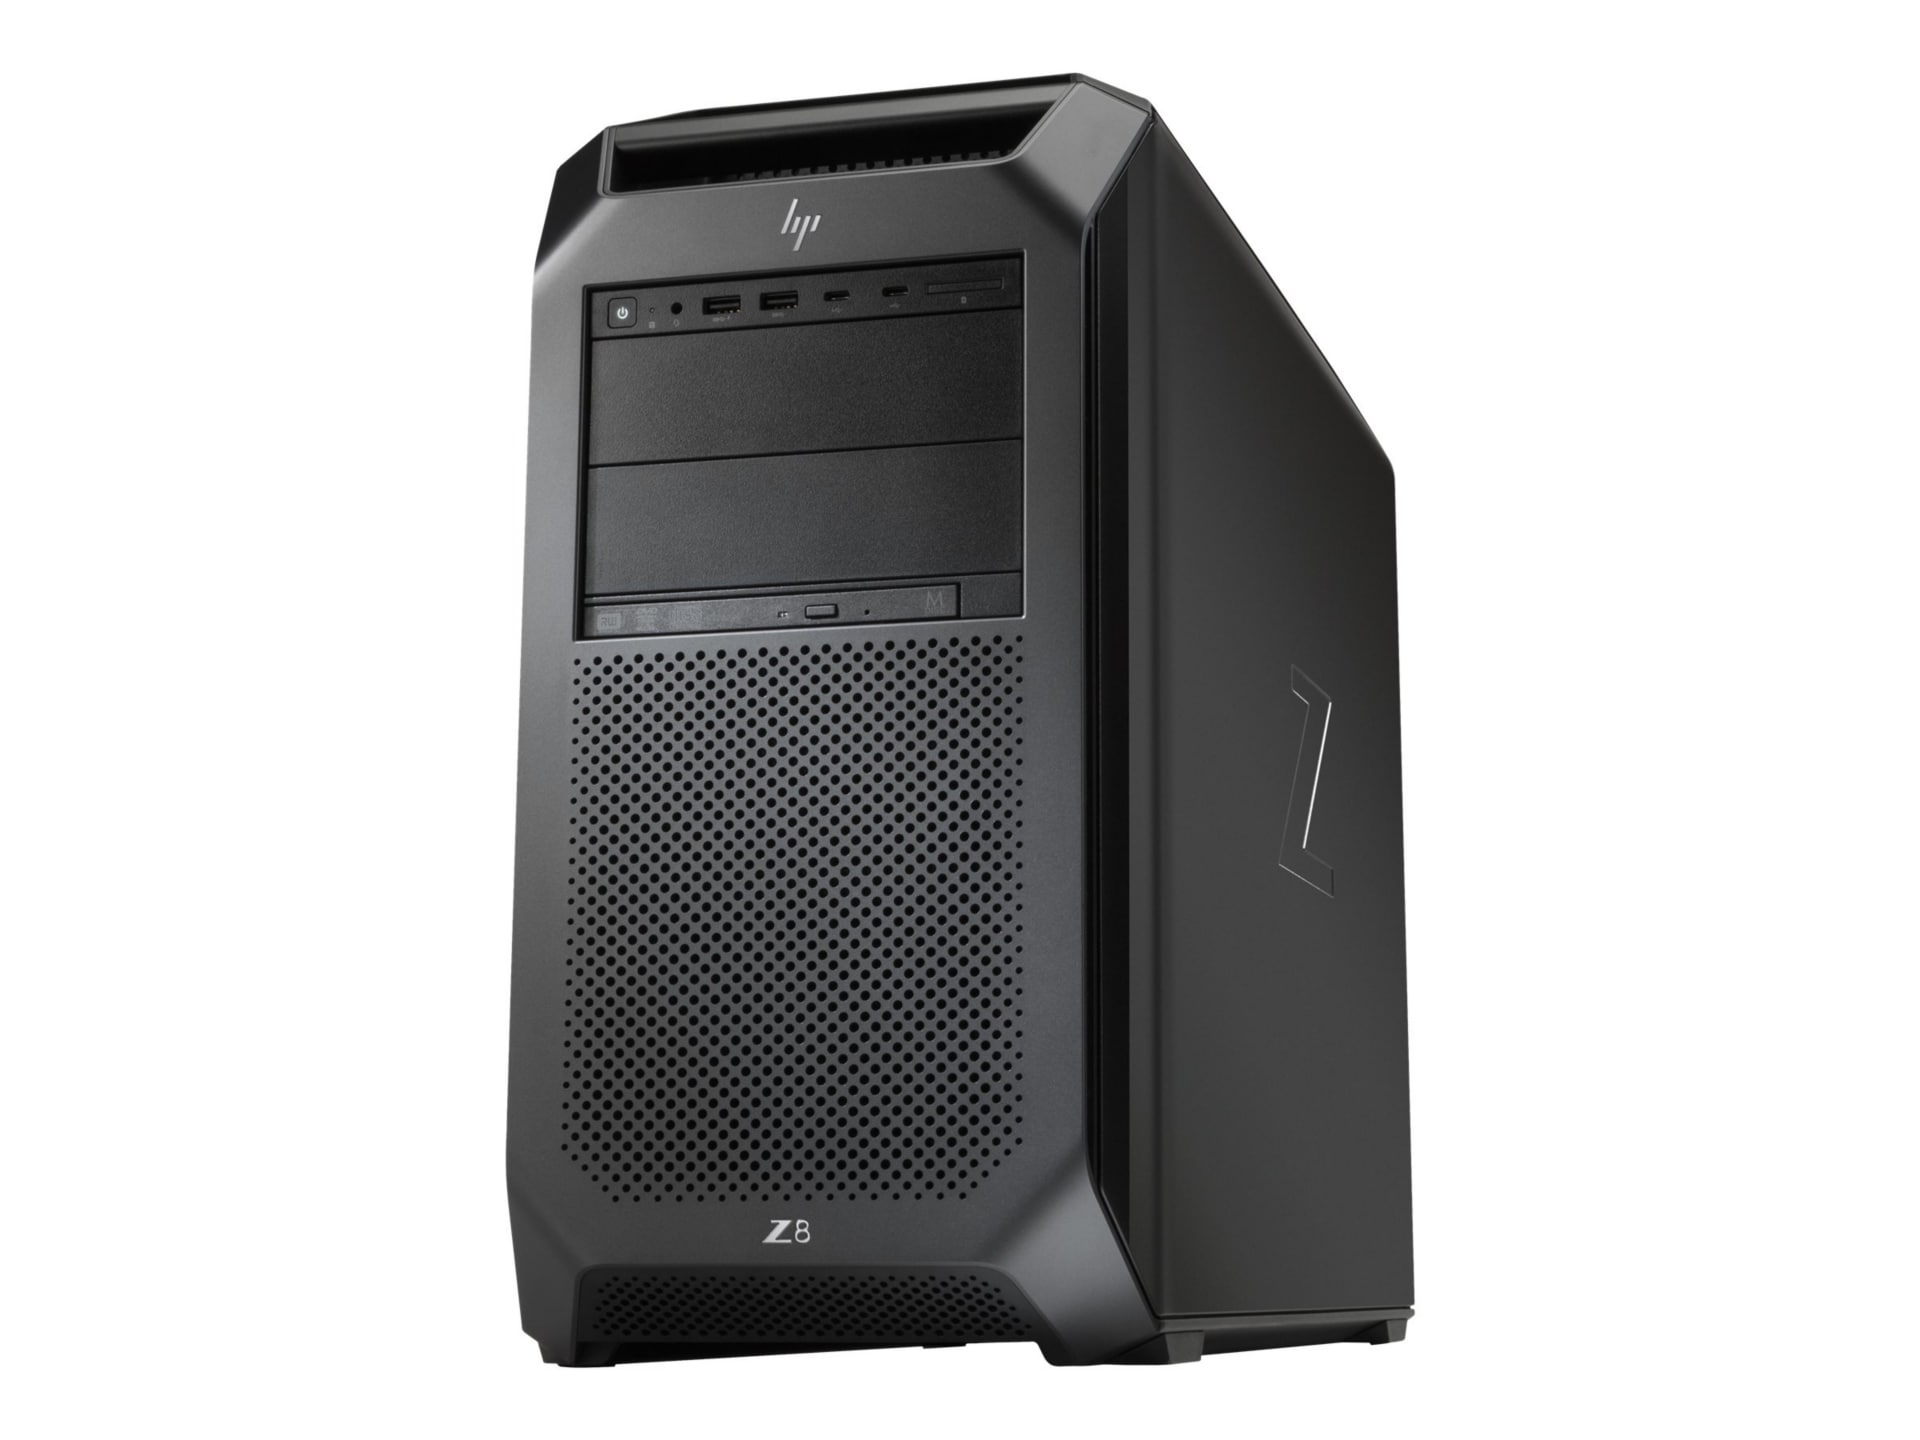 HP Workstation Z8 G4 - tower - Xeon Silver 4114 2.2 GHz - vPro - 8 GB - HDD